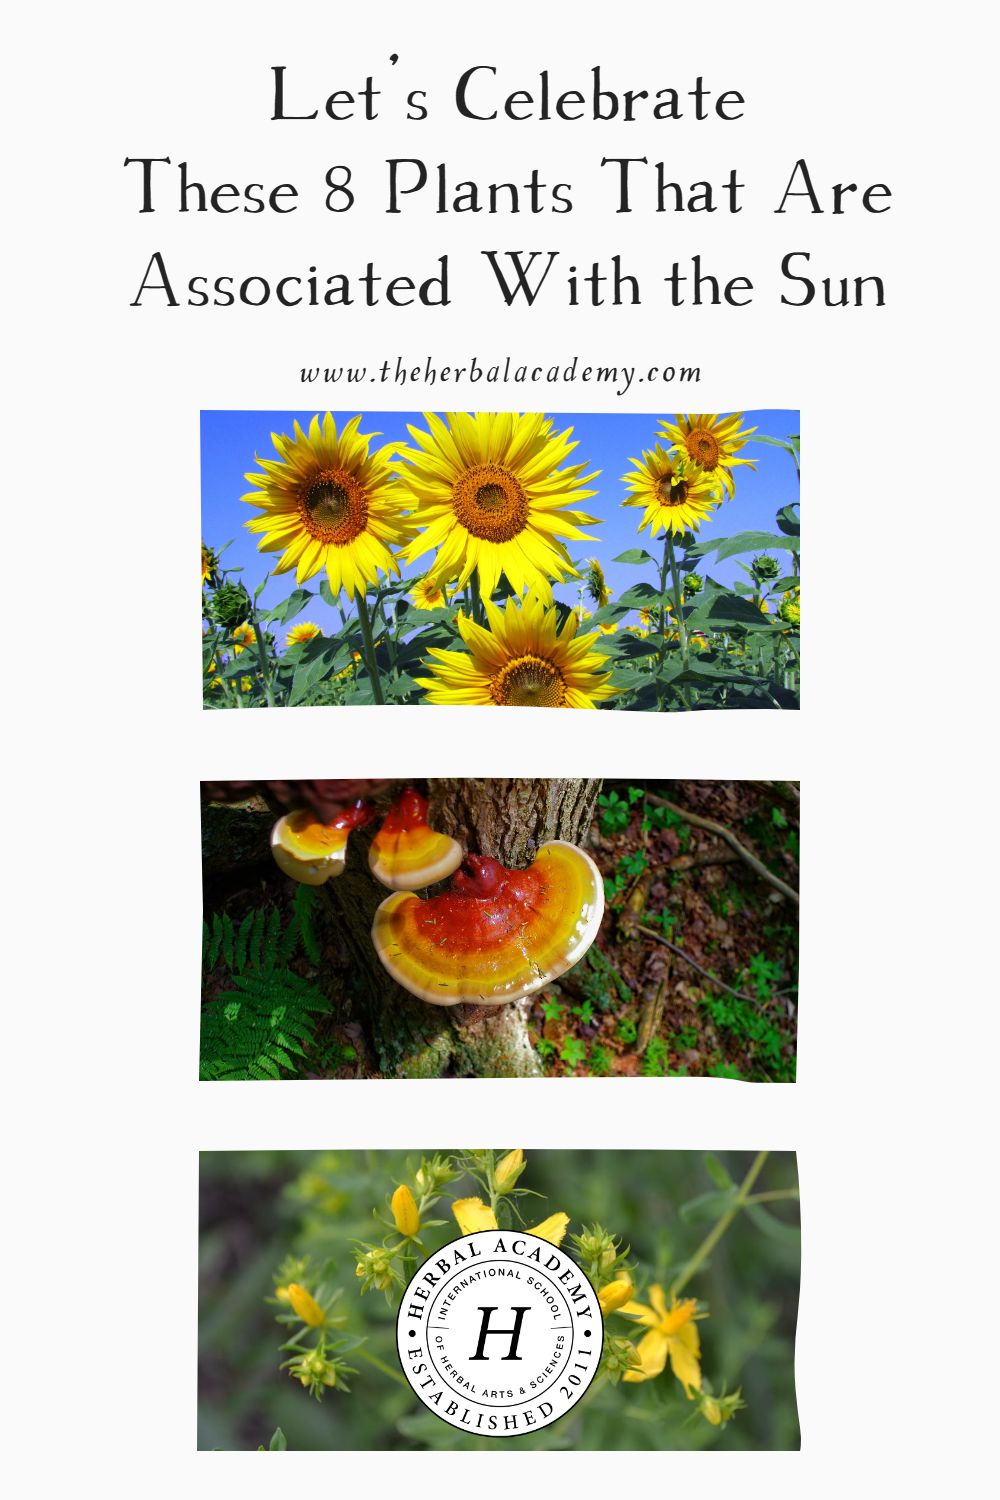 Let's Celebrate These 8 Plants That Are Associated With the Sun | Herbal Academy | Let's take a deeper look into these 8 plants associated with the Sun and how we can celebrate and enjoy the energizing connection.